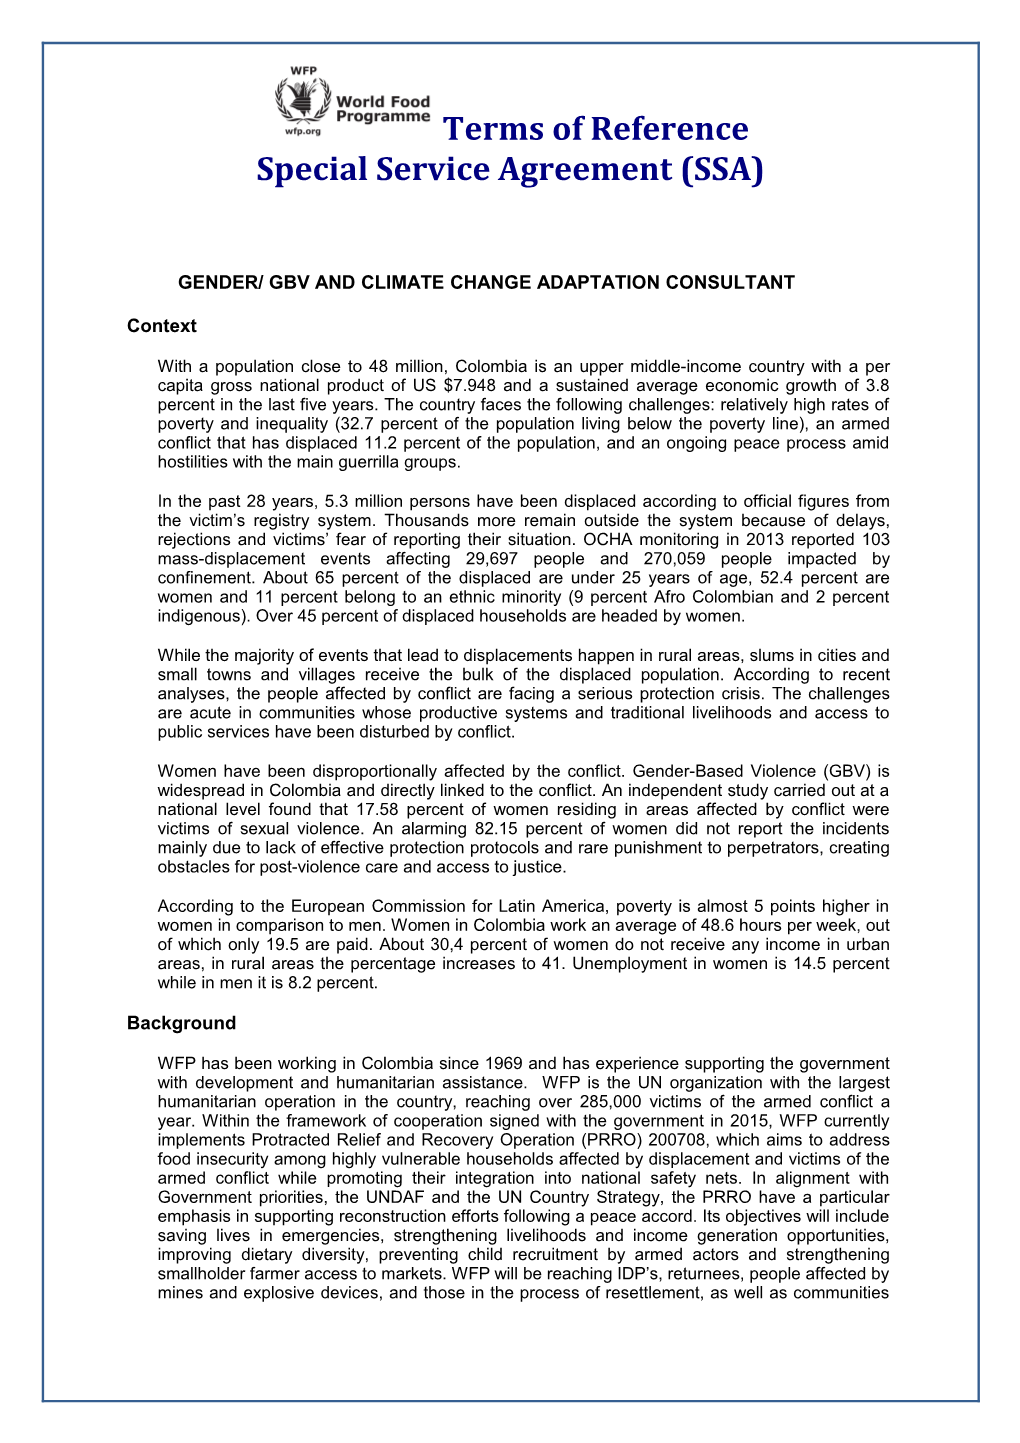 Gender/ Gbv and Climate Change Adaptation Consultant